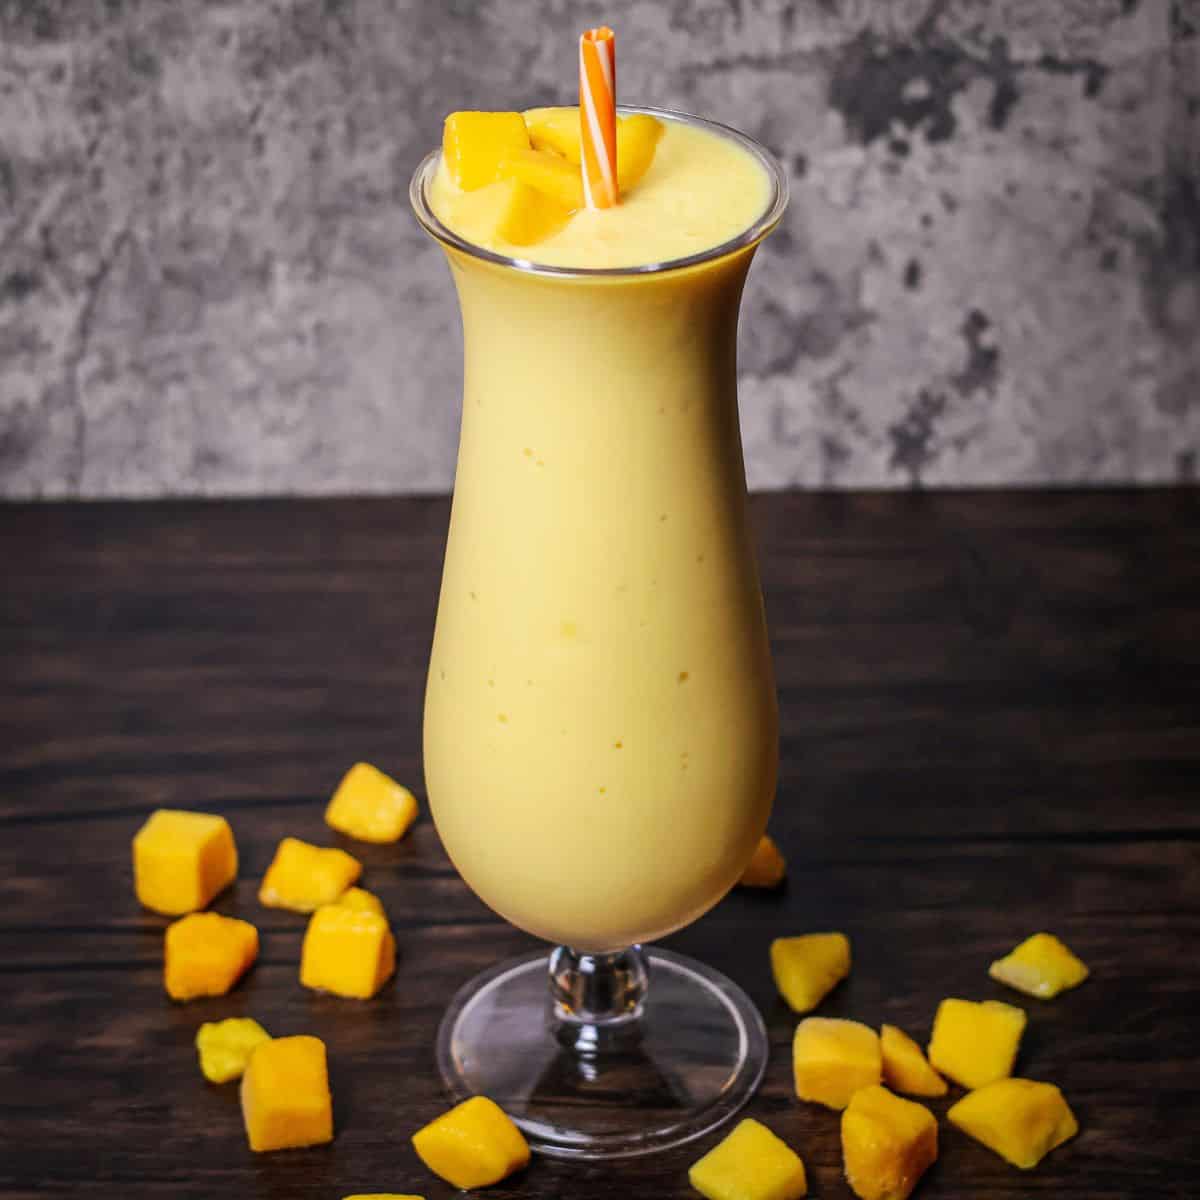 A finished mango a go go smoothie in a tall glass with an orange straw garnished with mango chunks i